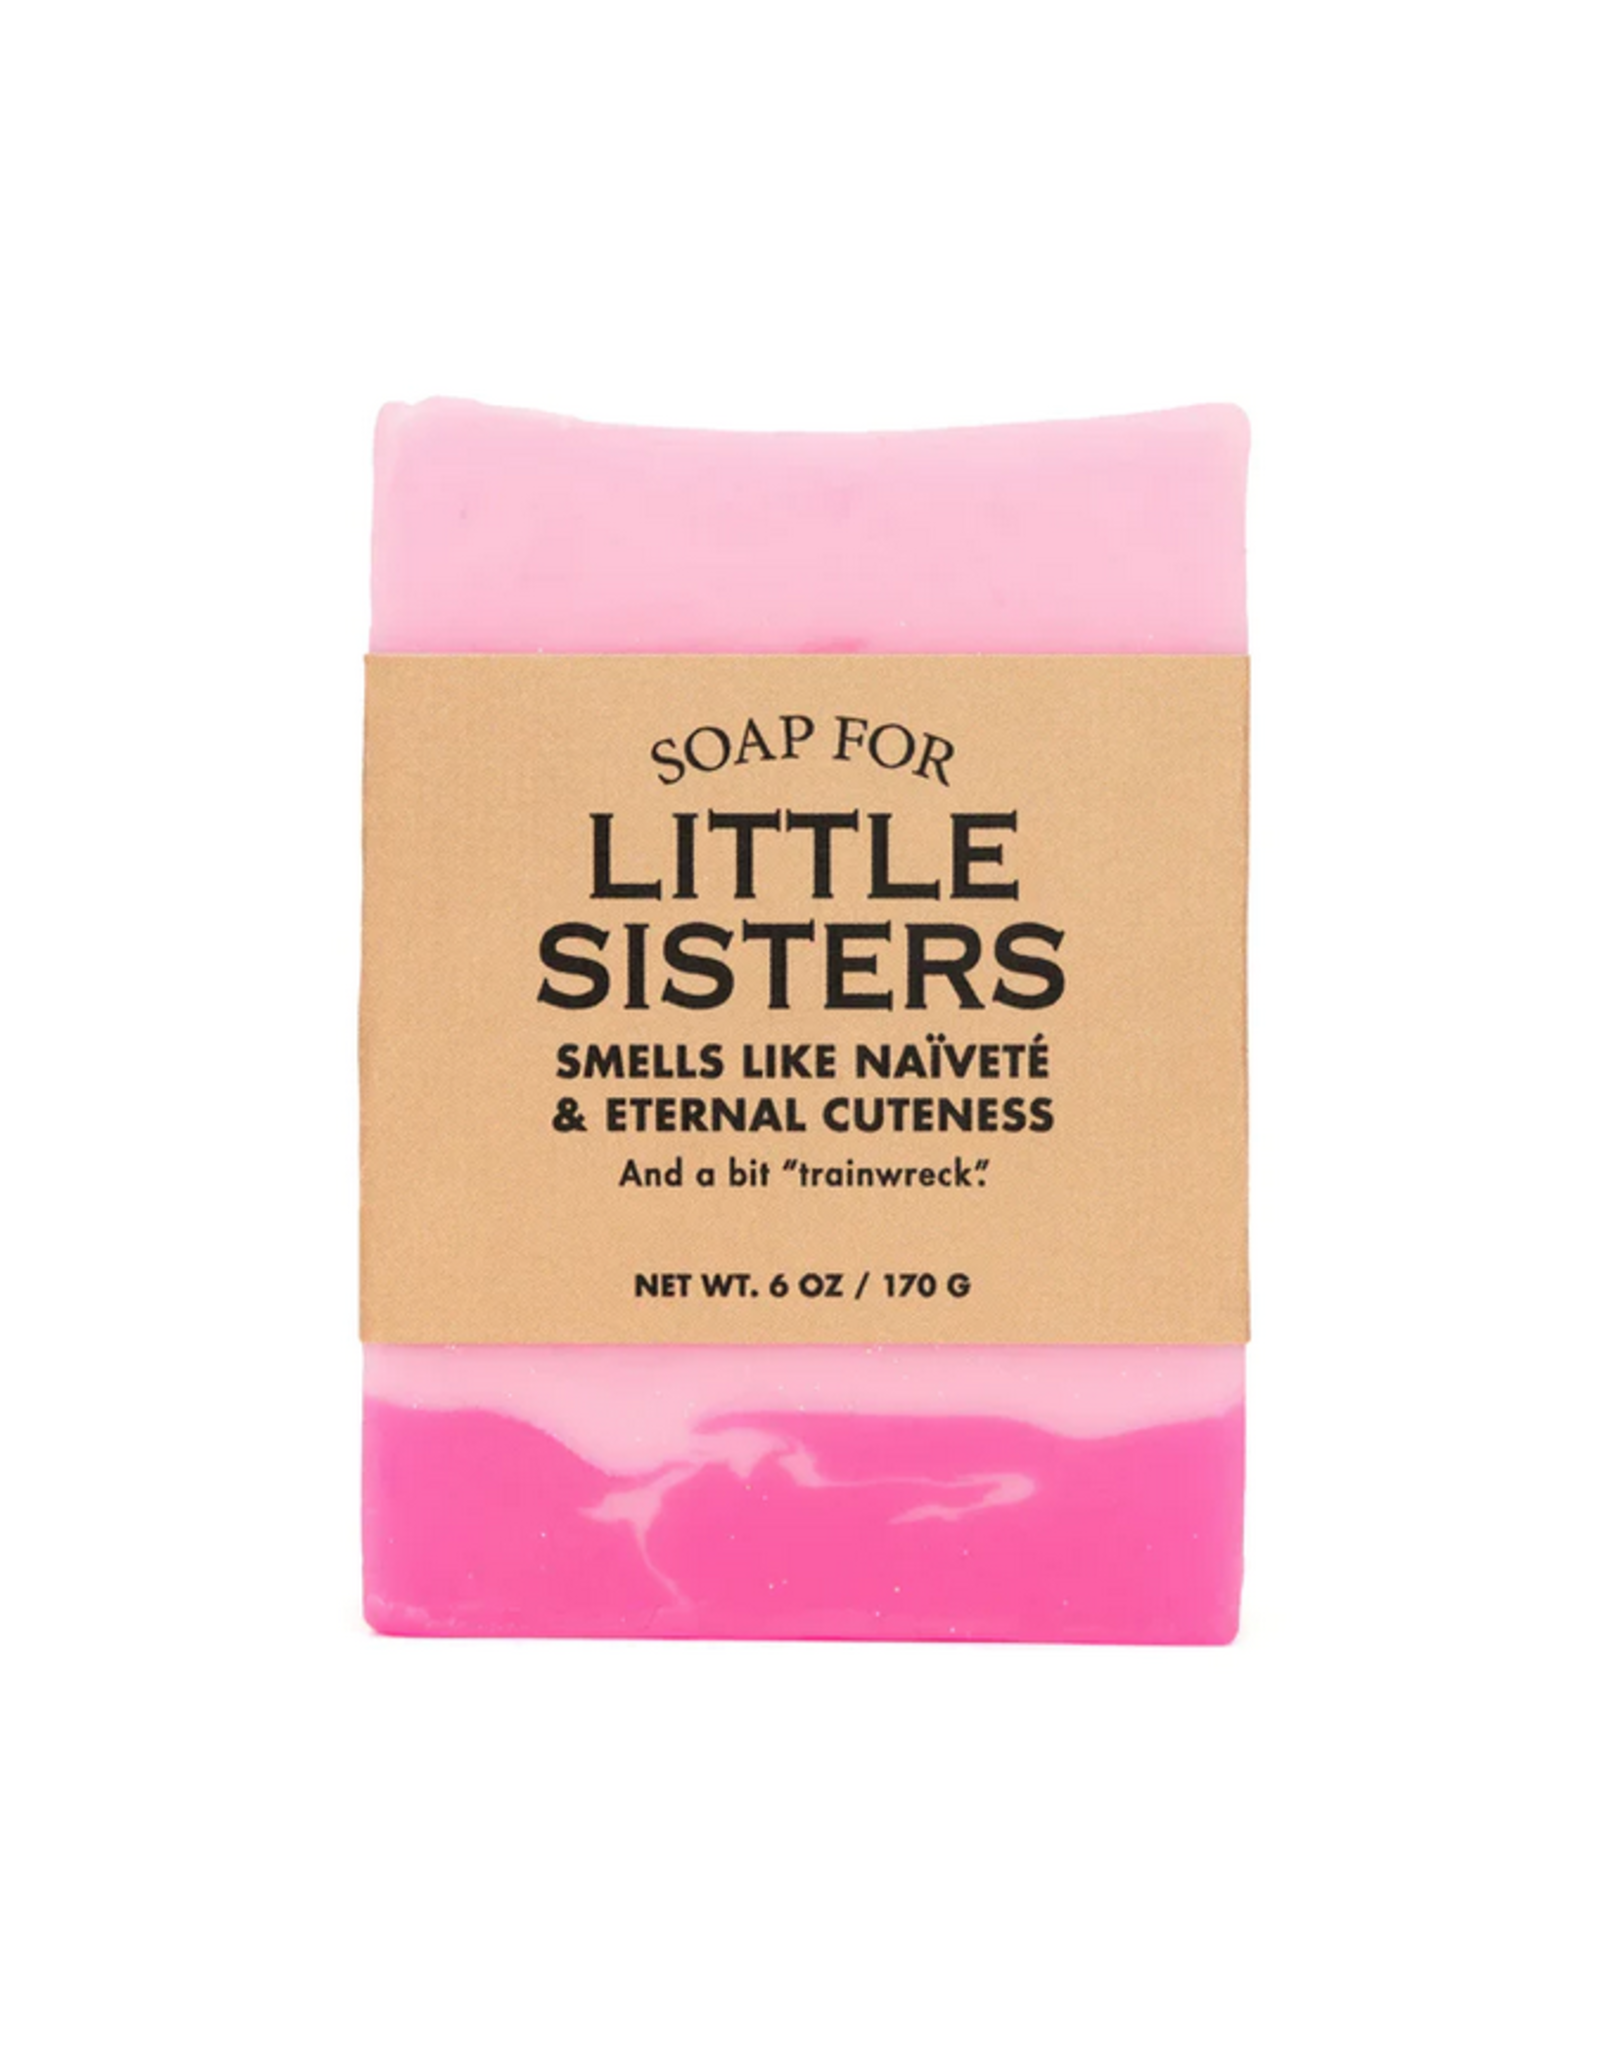 A Soap for Little Sisters